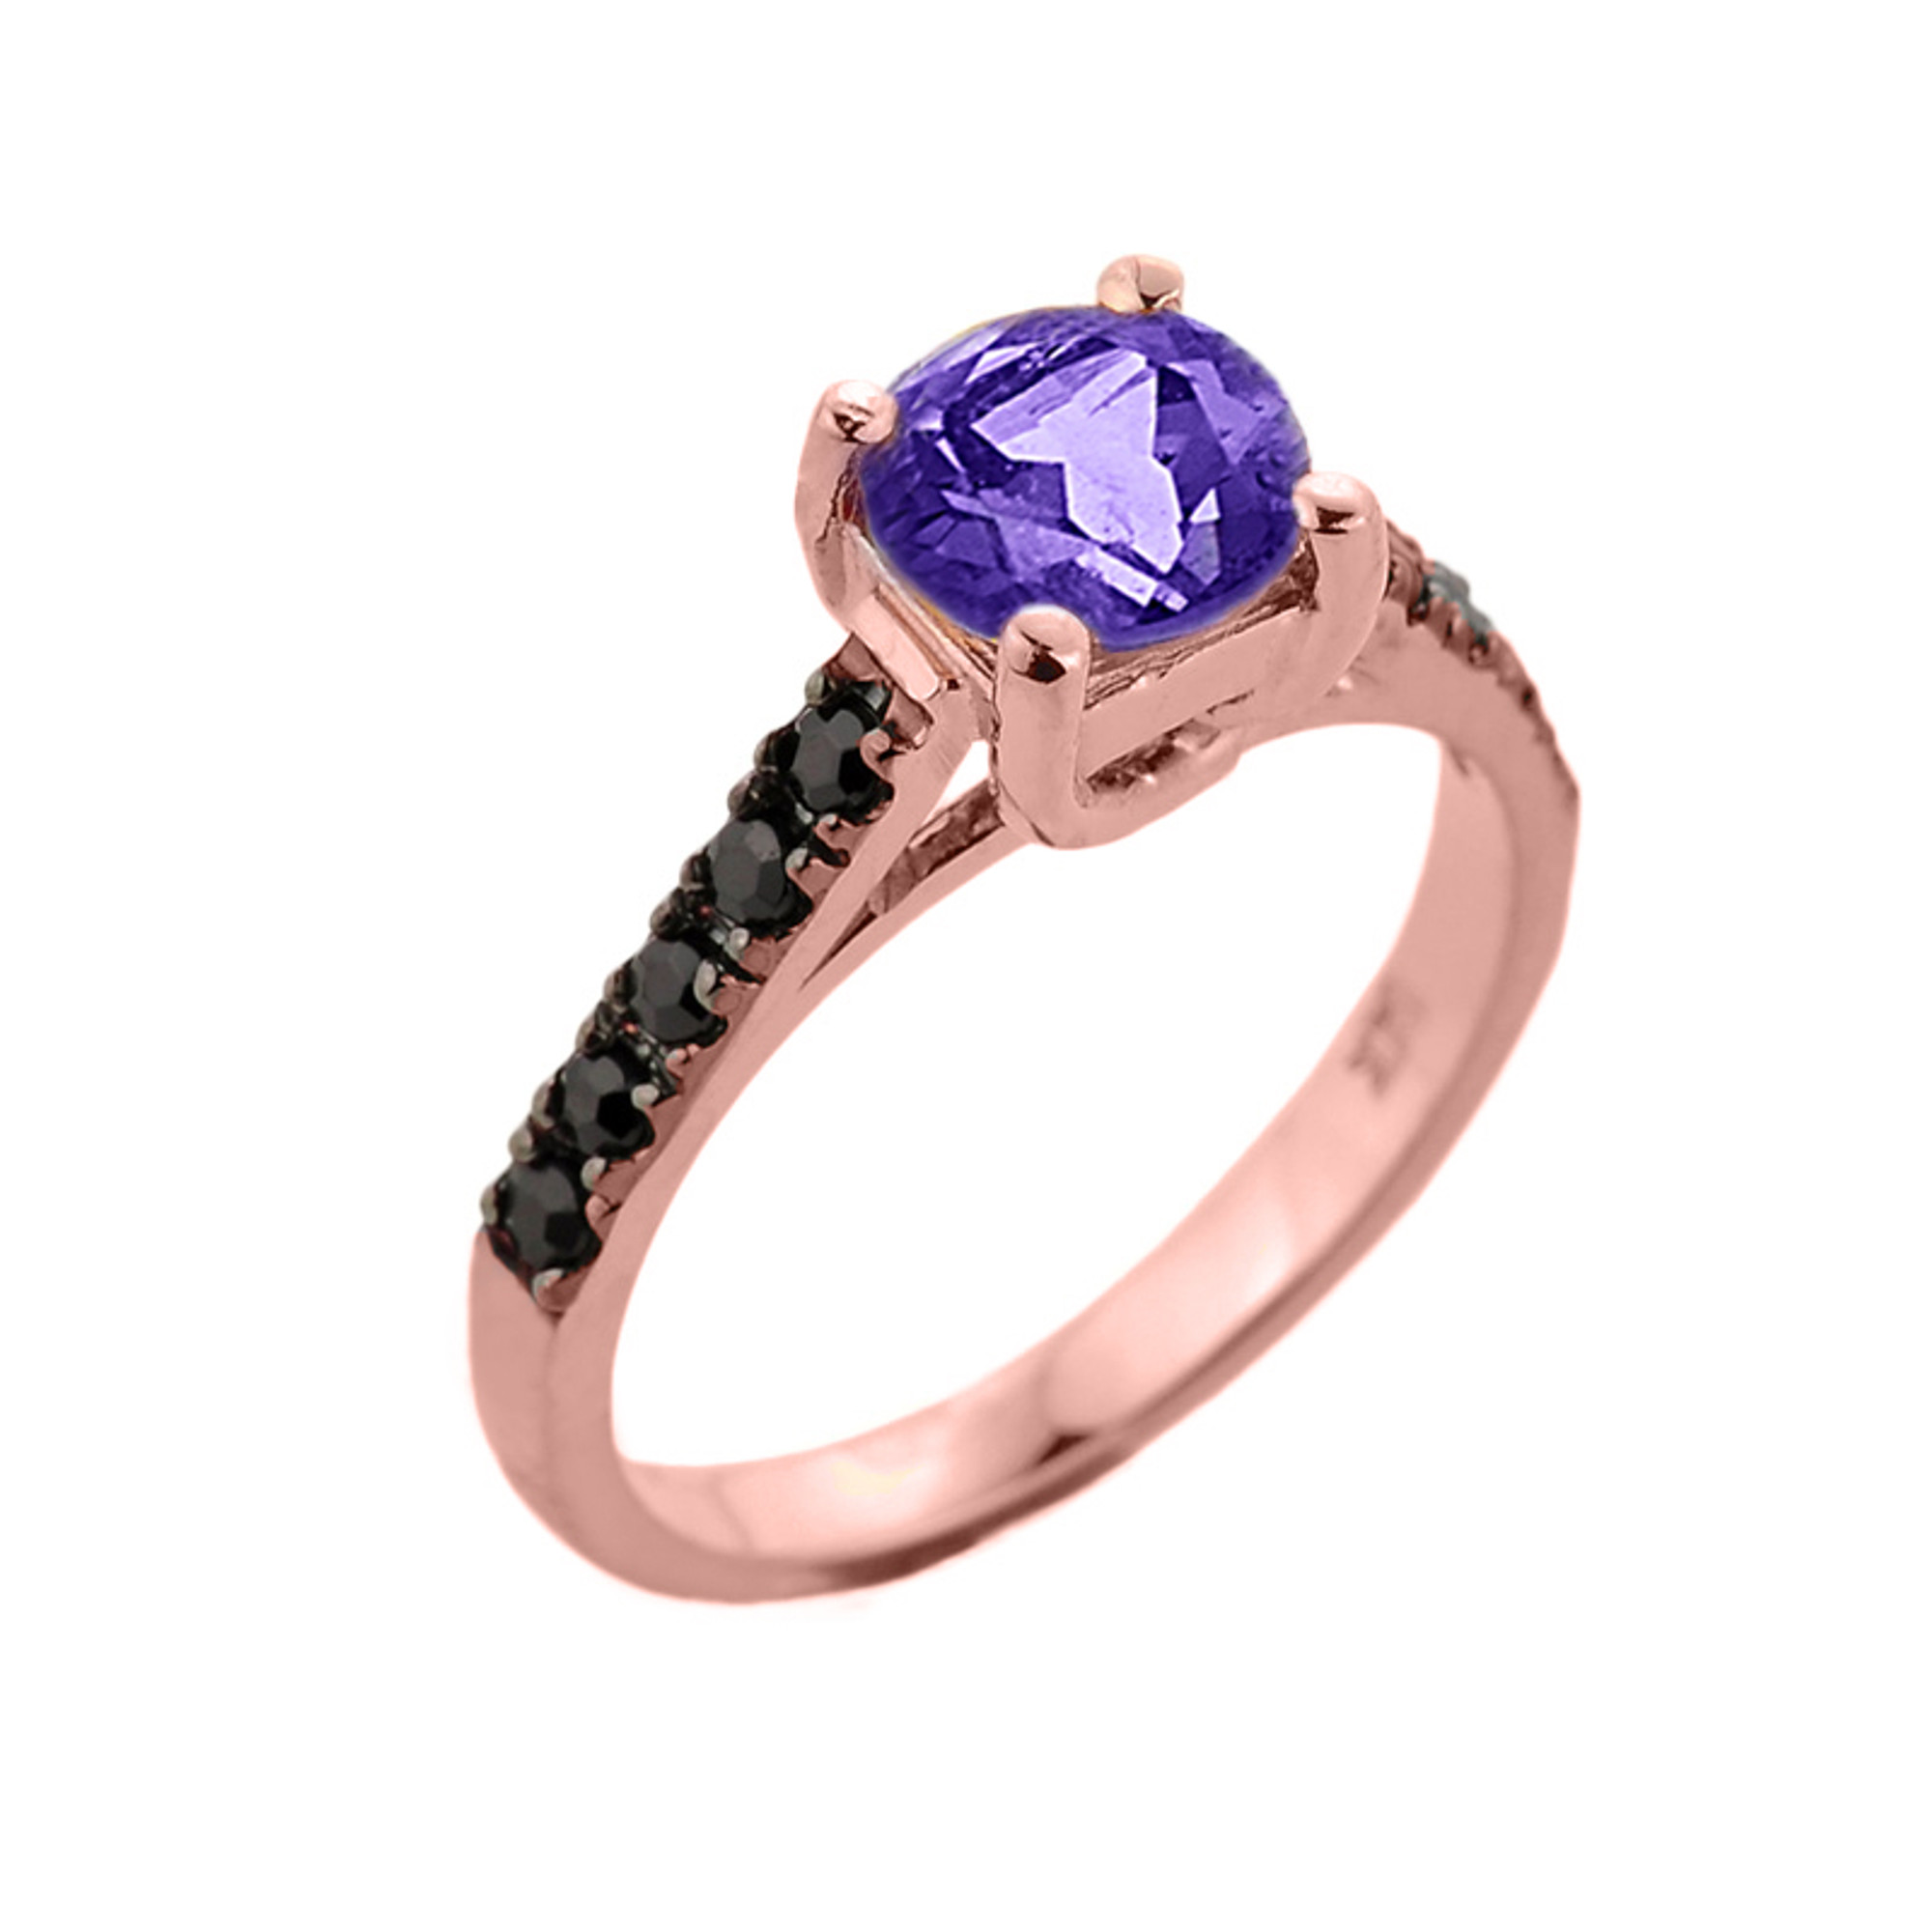 Amethyst Diamond Ring | Engagement Ring | Autumn and May